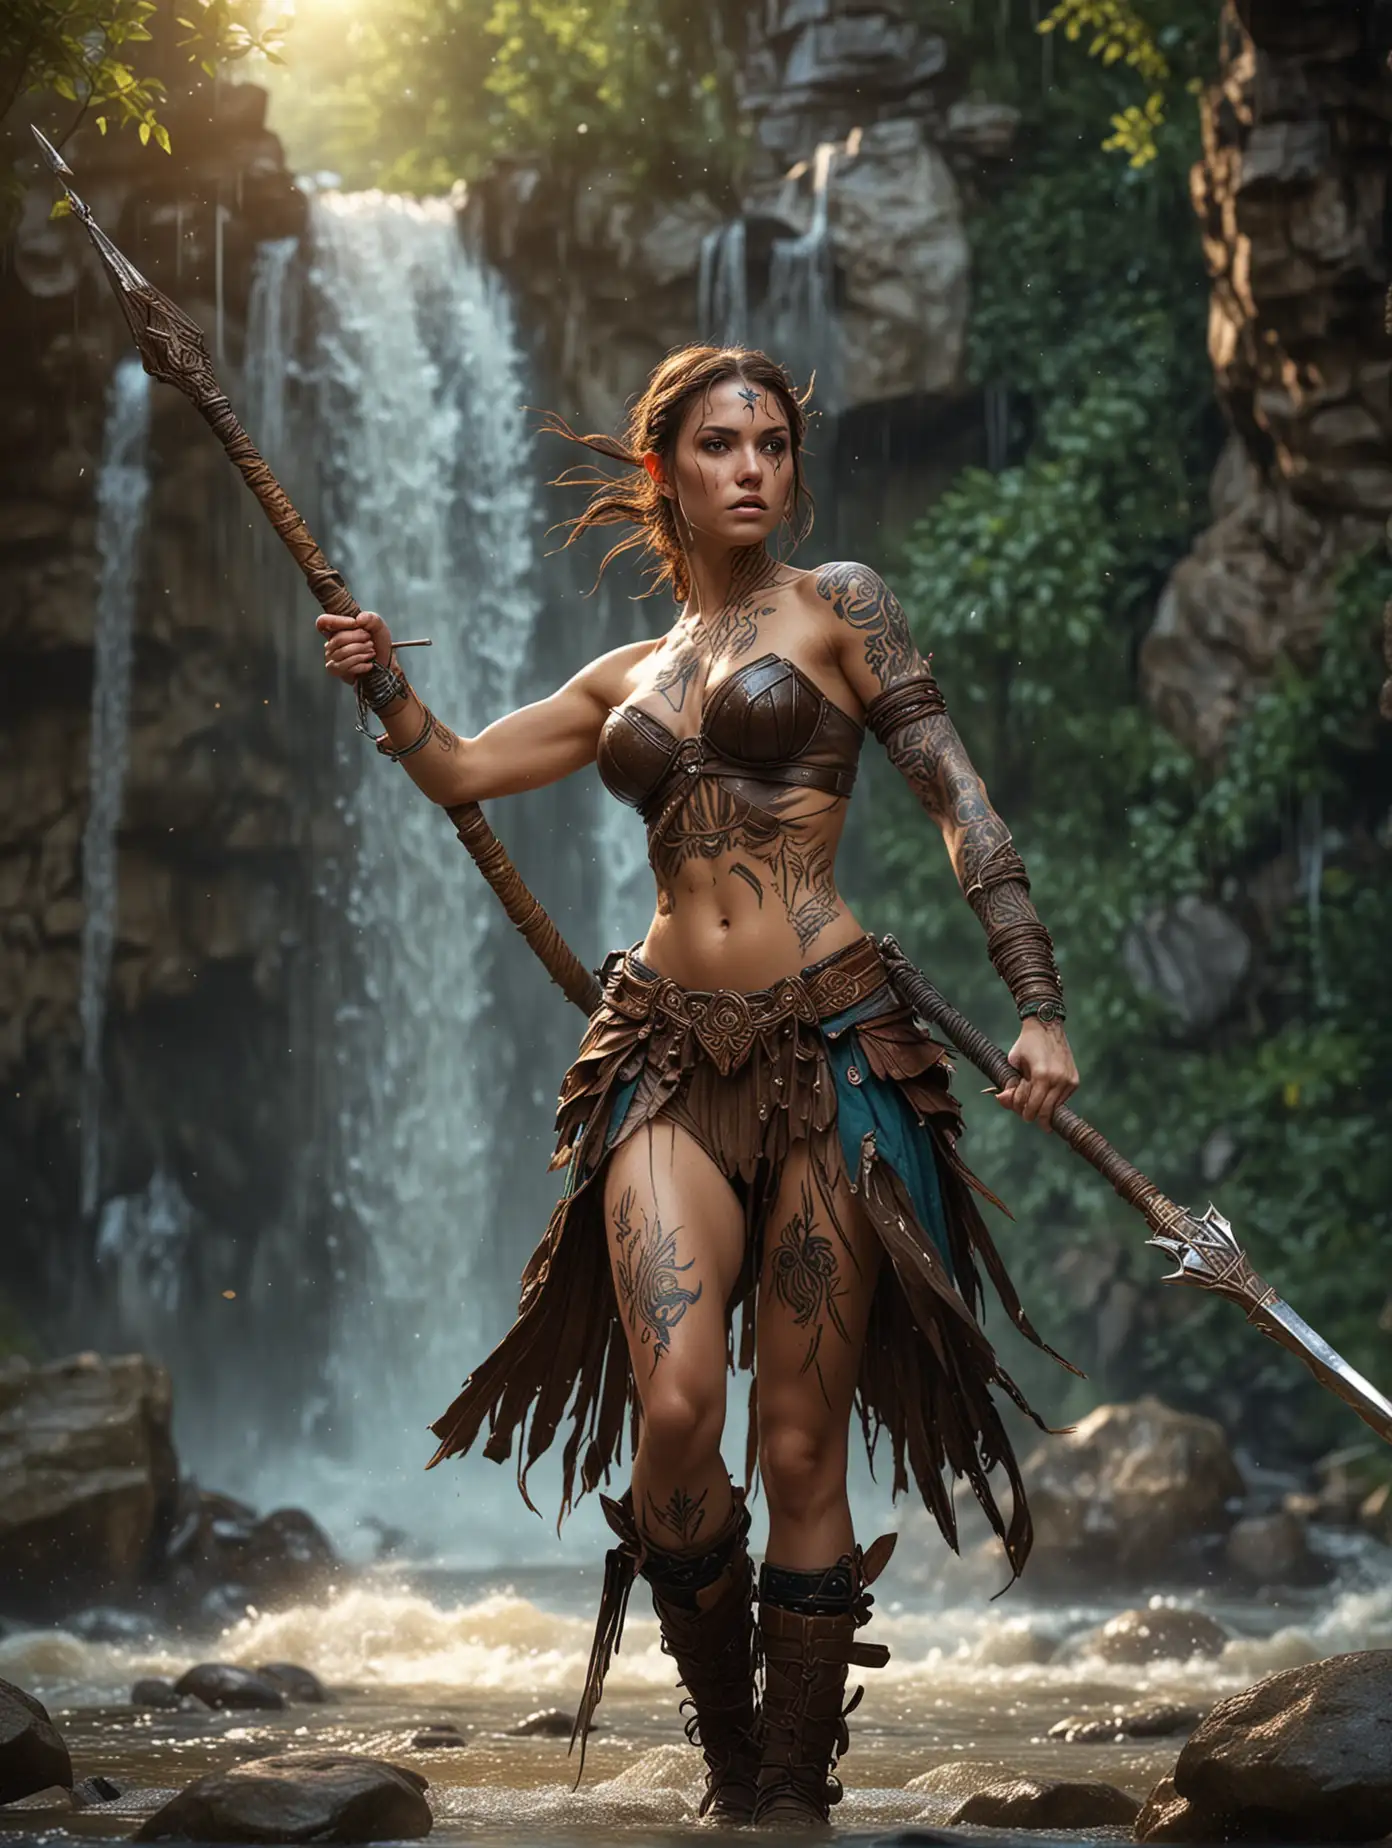 Whimsical, create an image of a beauty european girl, brunette hair, adorned skin with tattoes, in dynamic fight pose, holding a spear, cosplaying as amazon warrior character. Waterfall in riverside background. Fantasy theme, colorful organic shape, dramatic lighting, hyper-detailed, ultra HD.